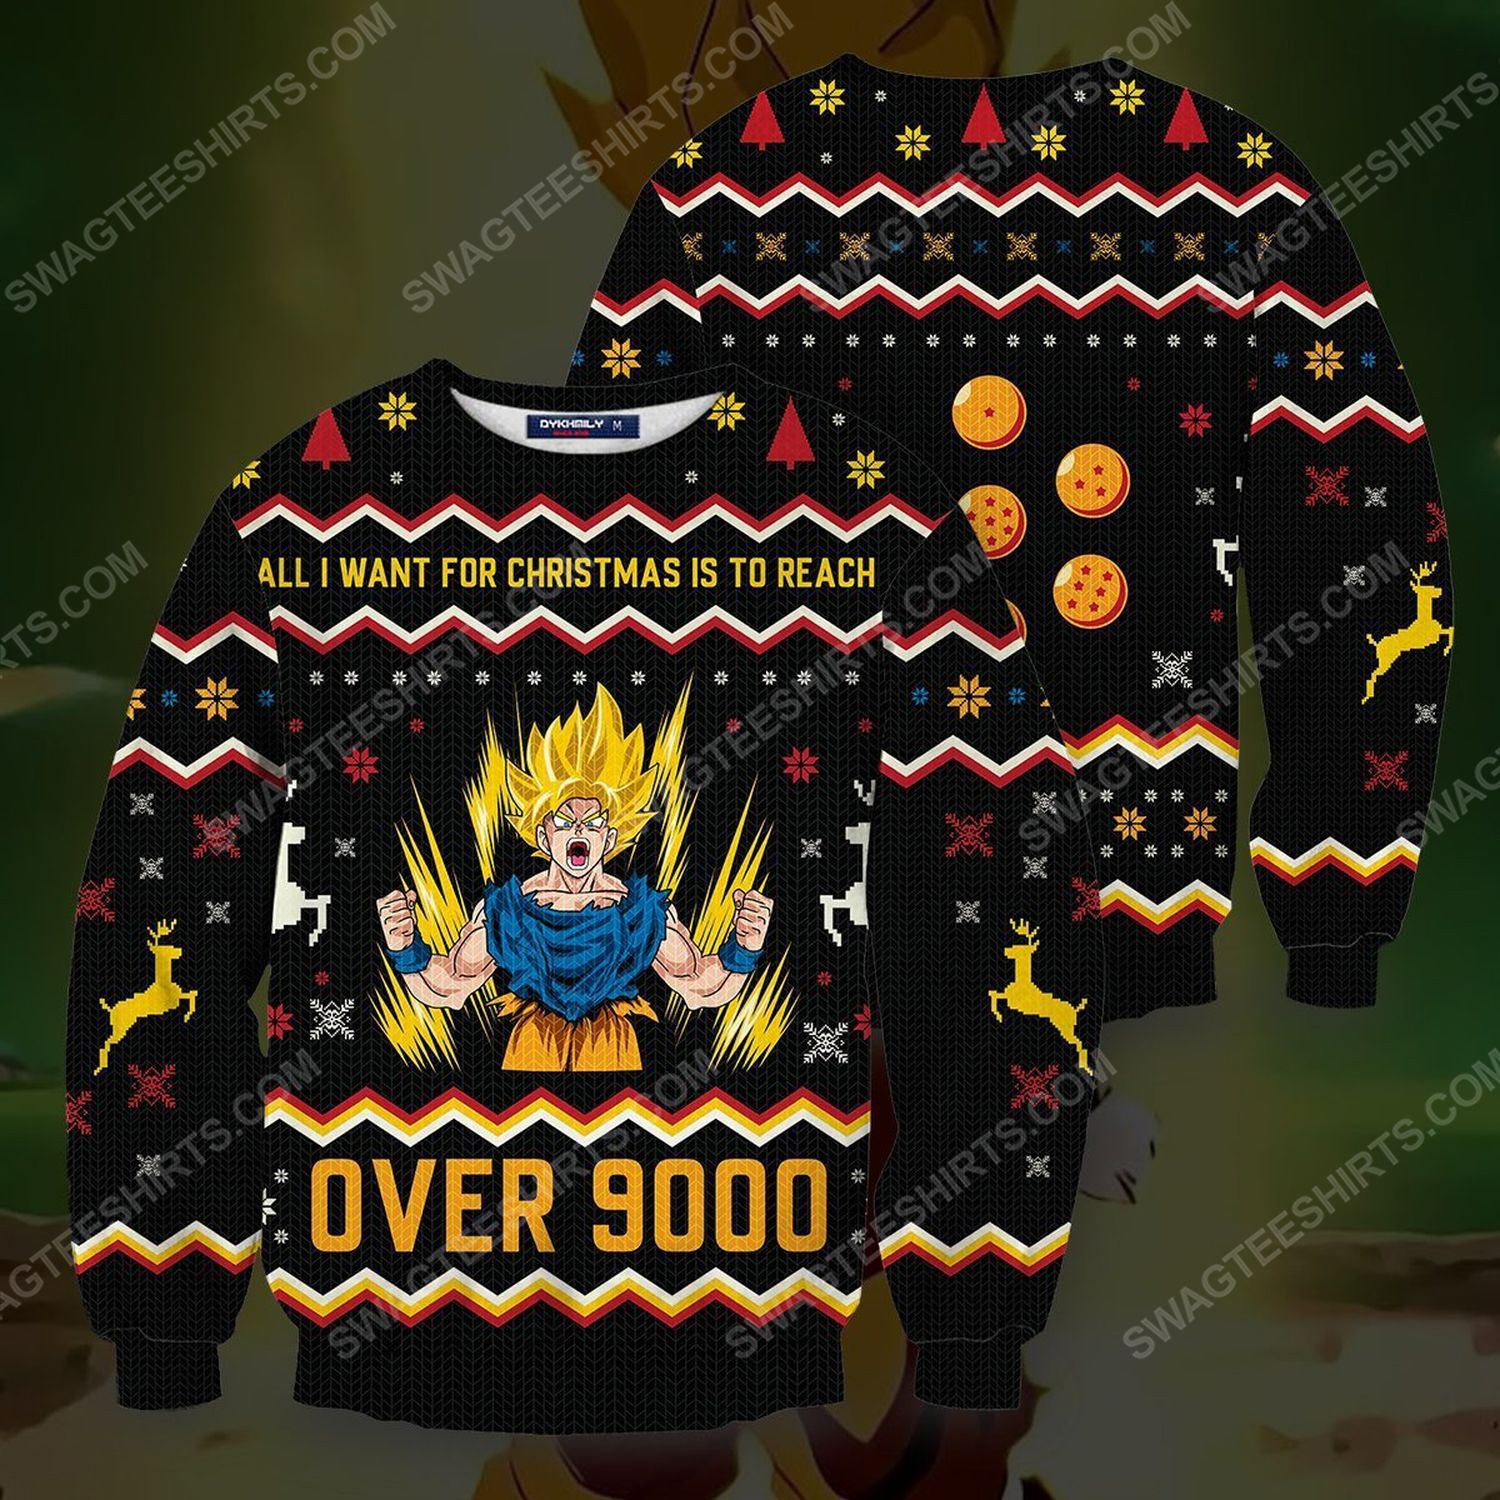 [special edition] All i want for christmas is to reach over 9000 full print ugly christmas sweater – maria